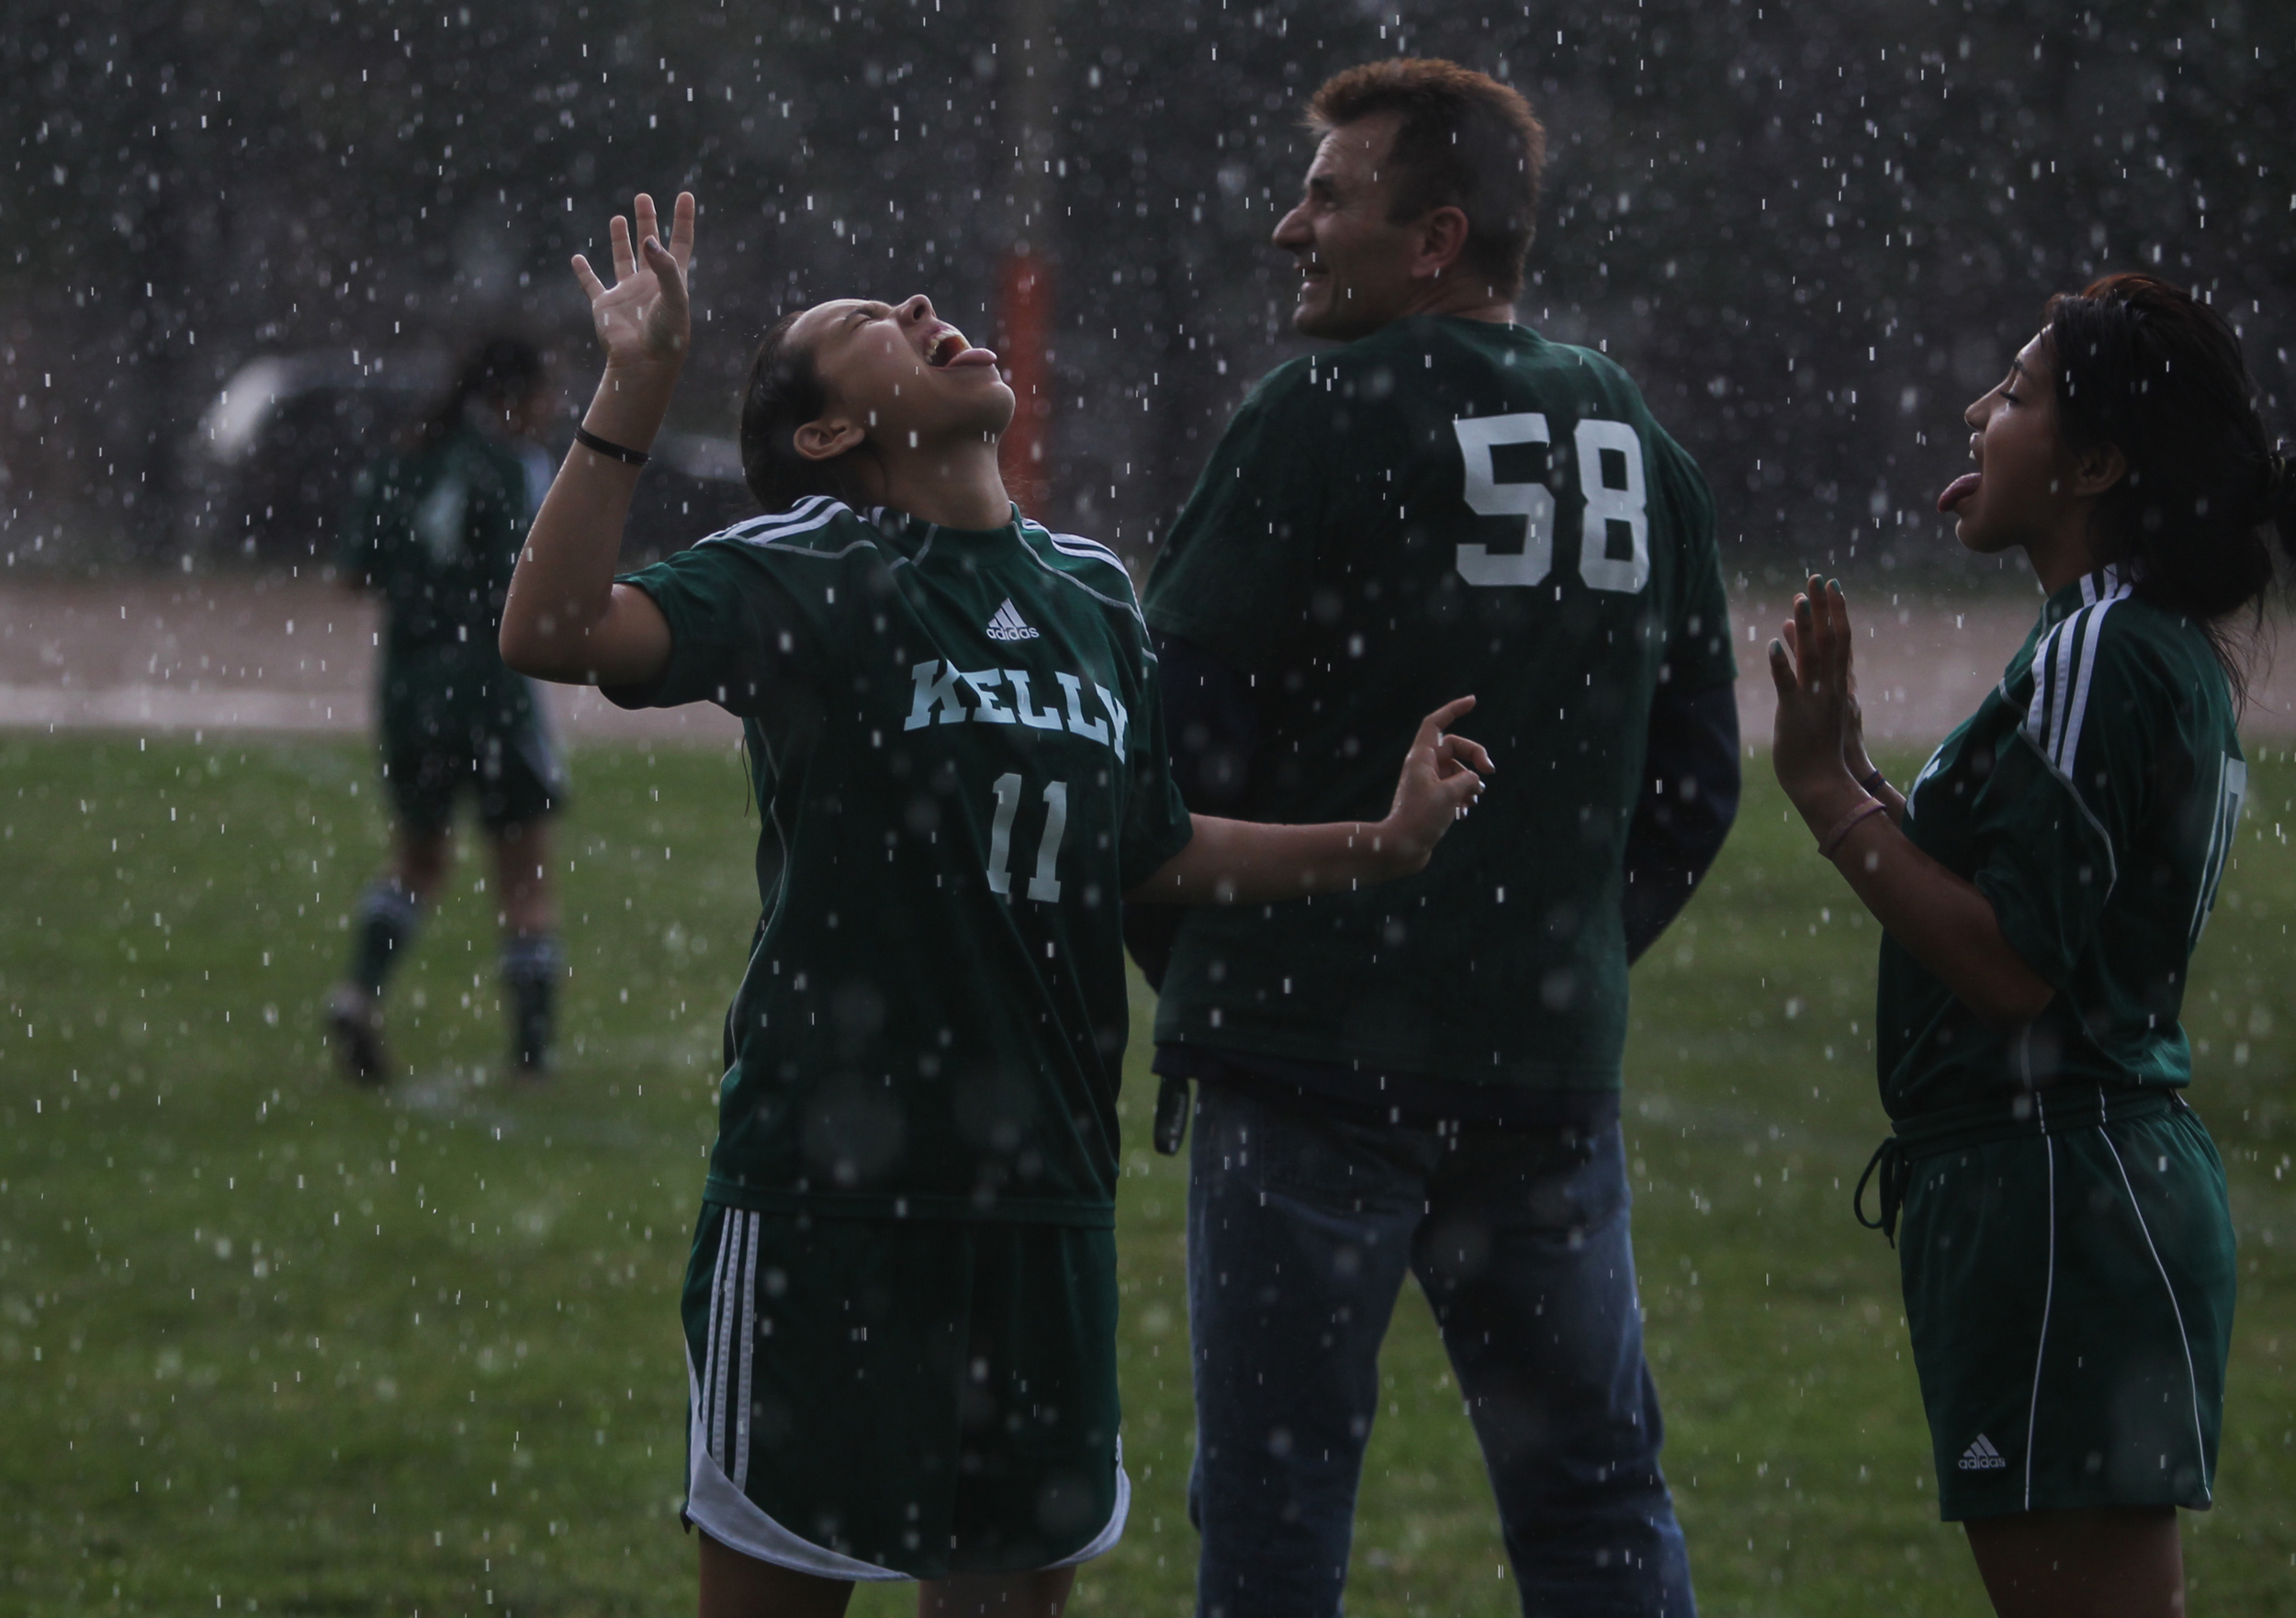  Jennifer Medina, left, and Marbella Rodriquez play in the rain behind their coach, Stan Mietus, during practice in front of the Kelly High School in Chicago on Tuesday, June 11, 2013. &nbsp;The Kelly High School girls varsity soccer team is almost e